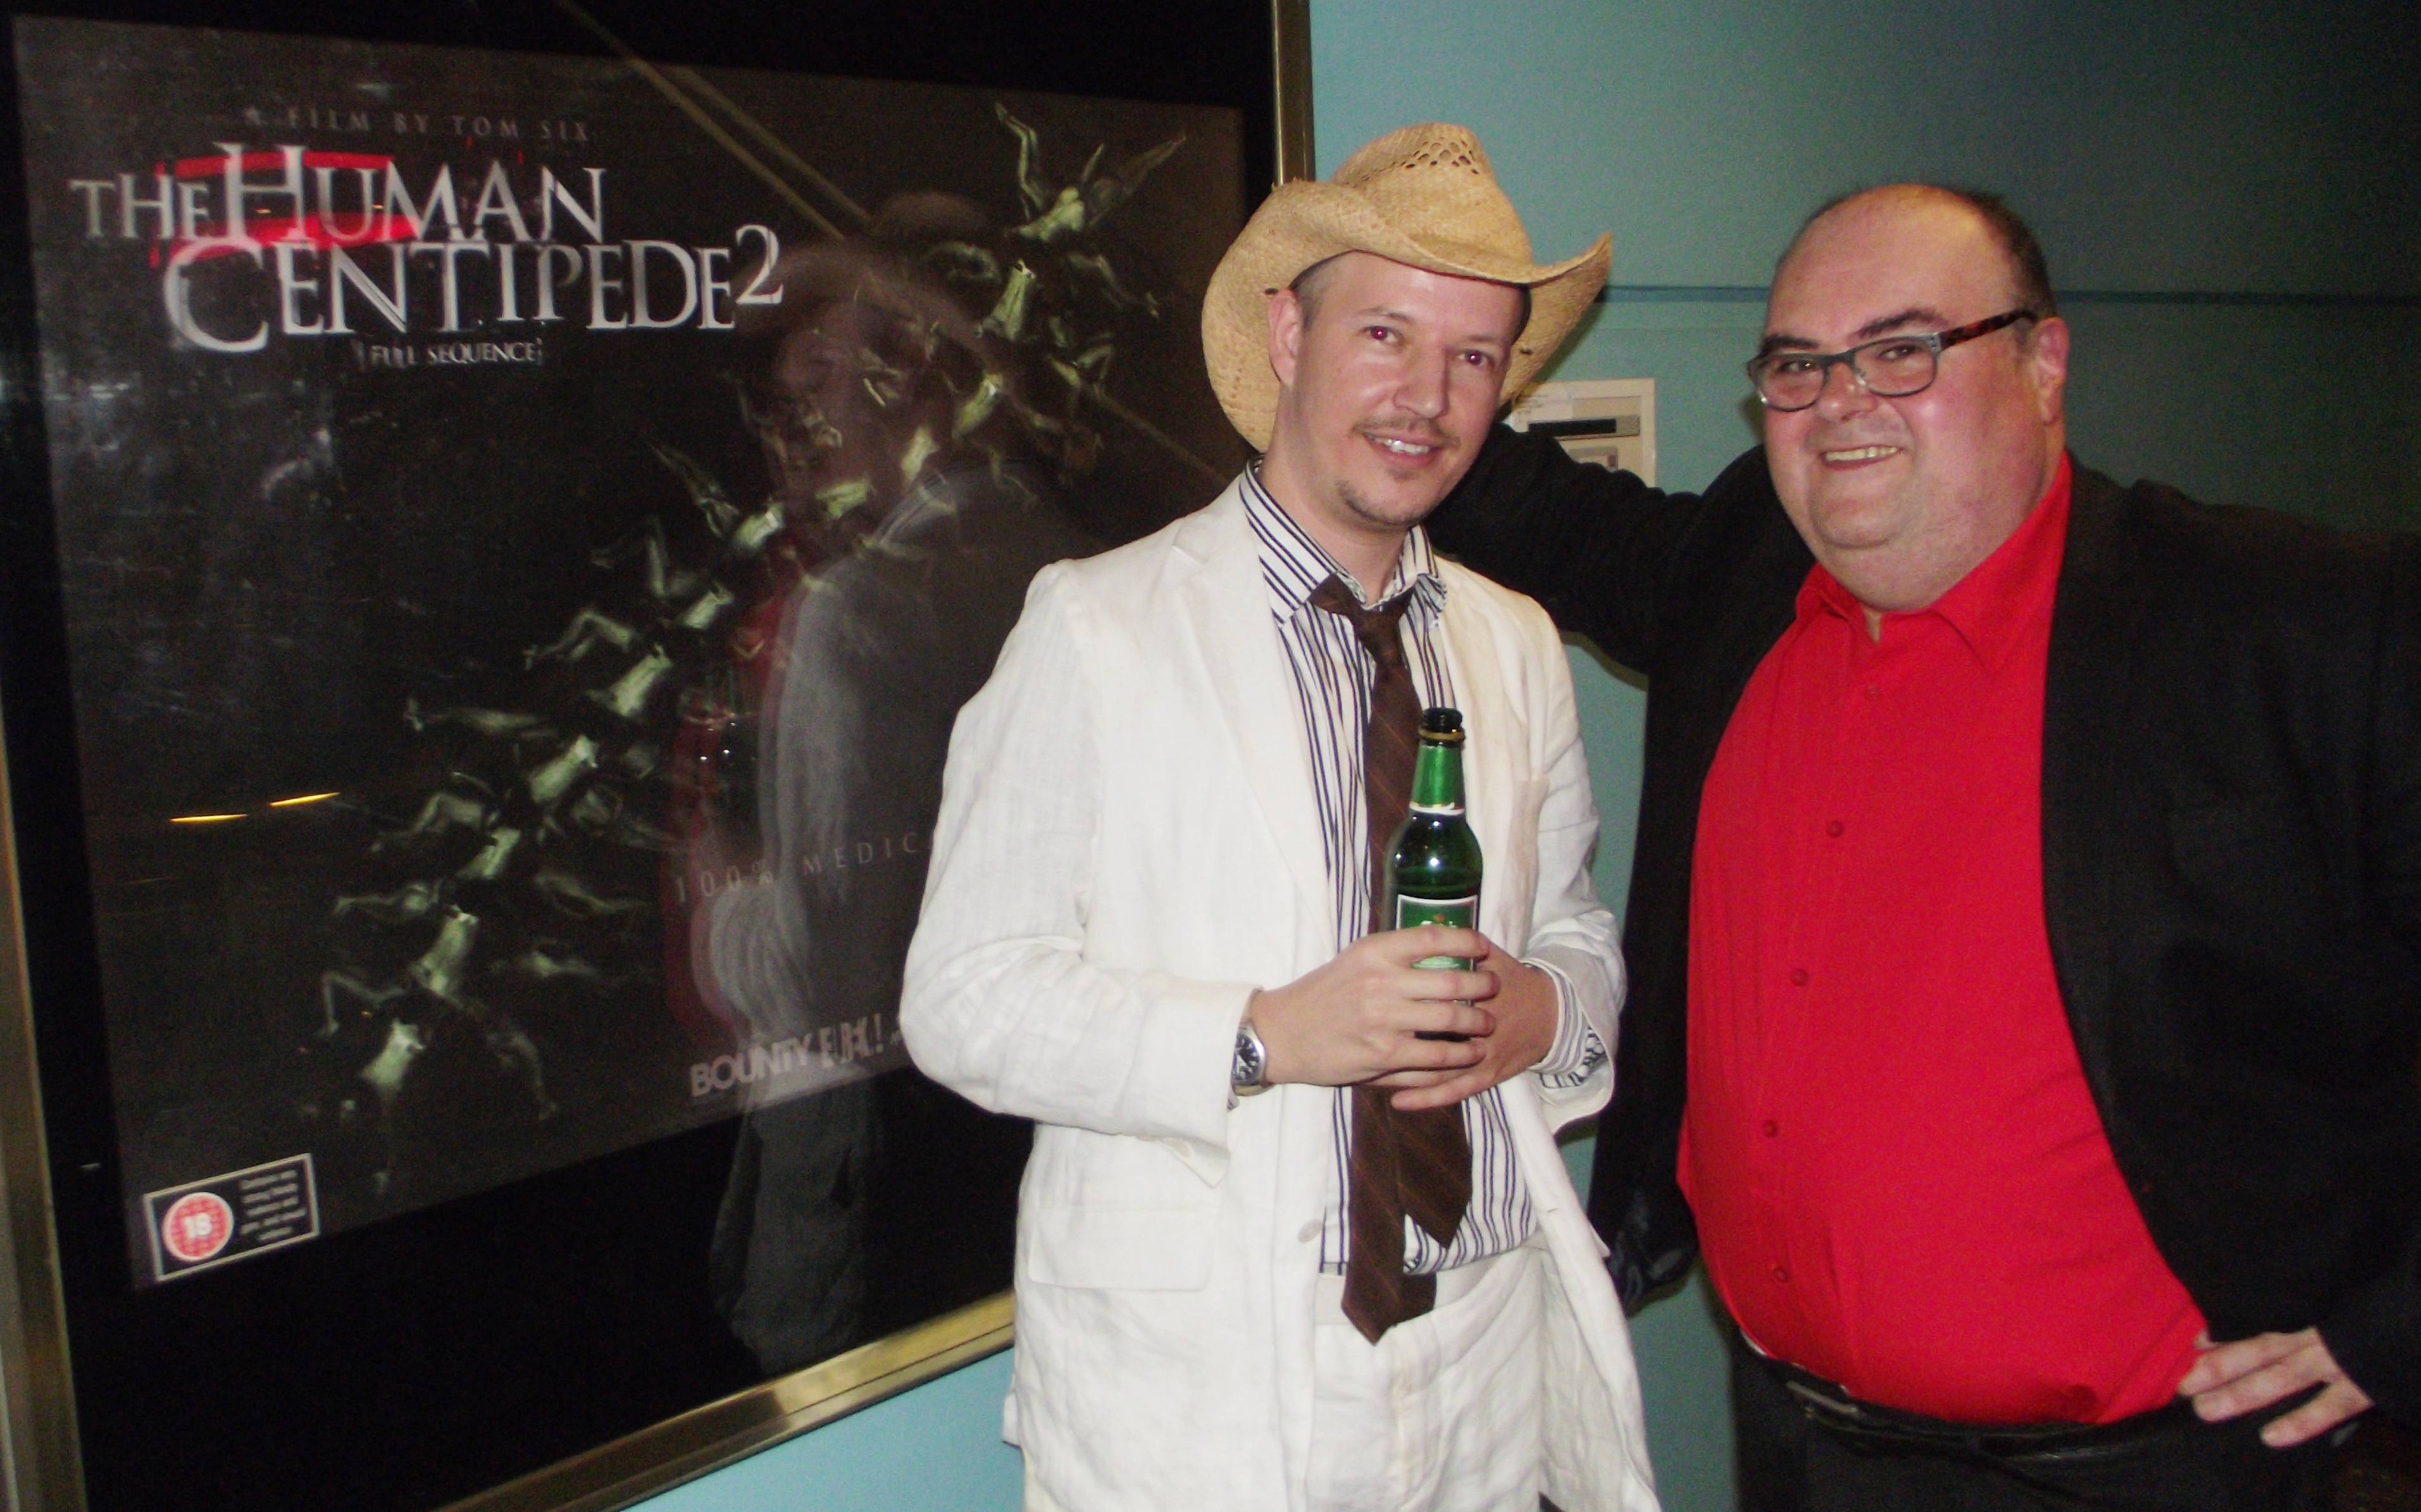 Dominic Borrelli and Director Tom Six at the UK premiere of Human Centipede 2